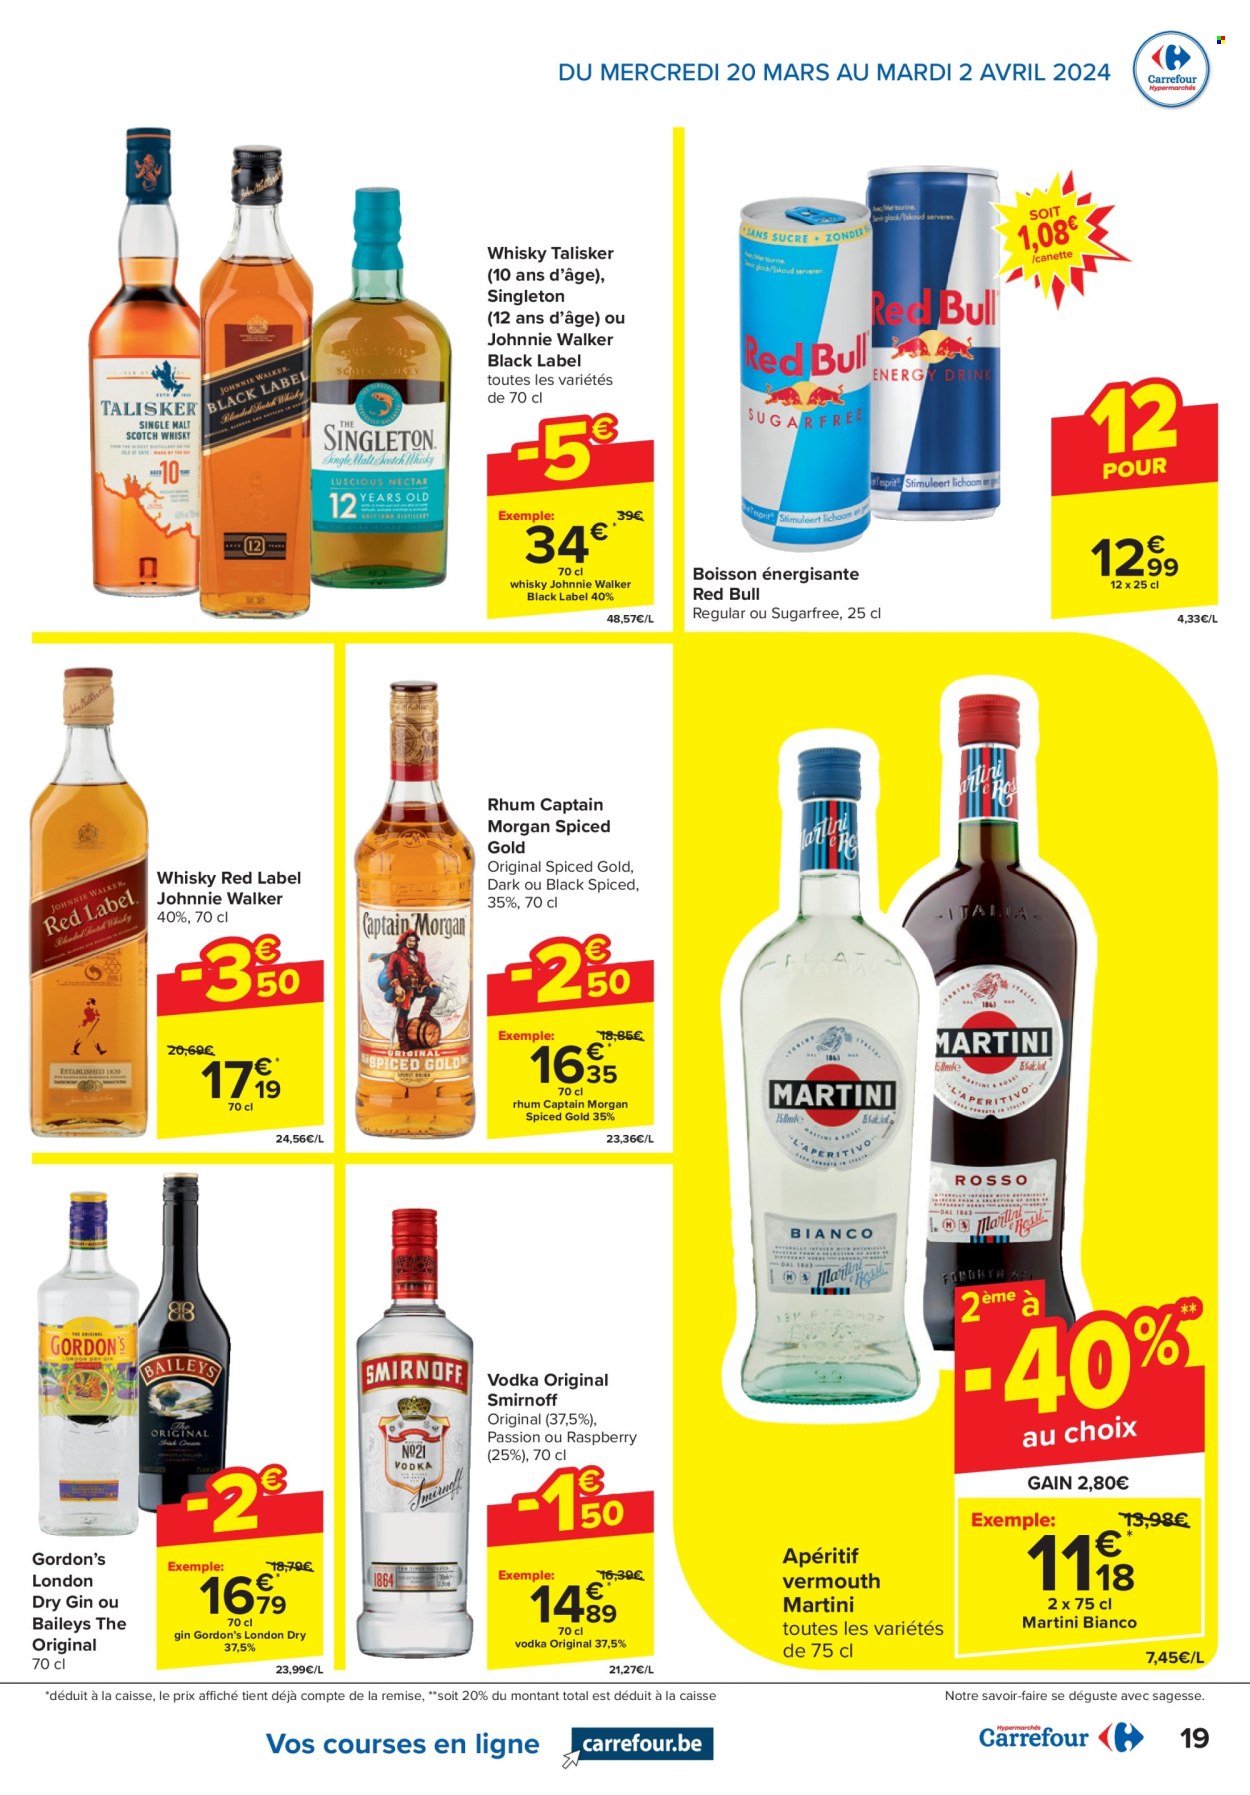 Catalogue Carrefour hypermarkt - 20.3.2024 - 2.4.2024. Page 19.